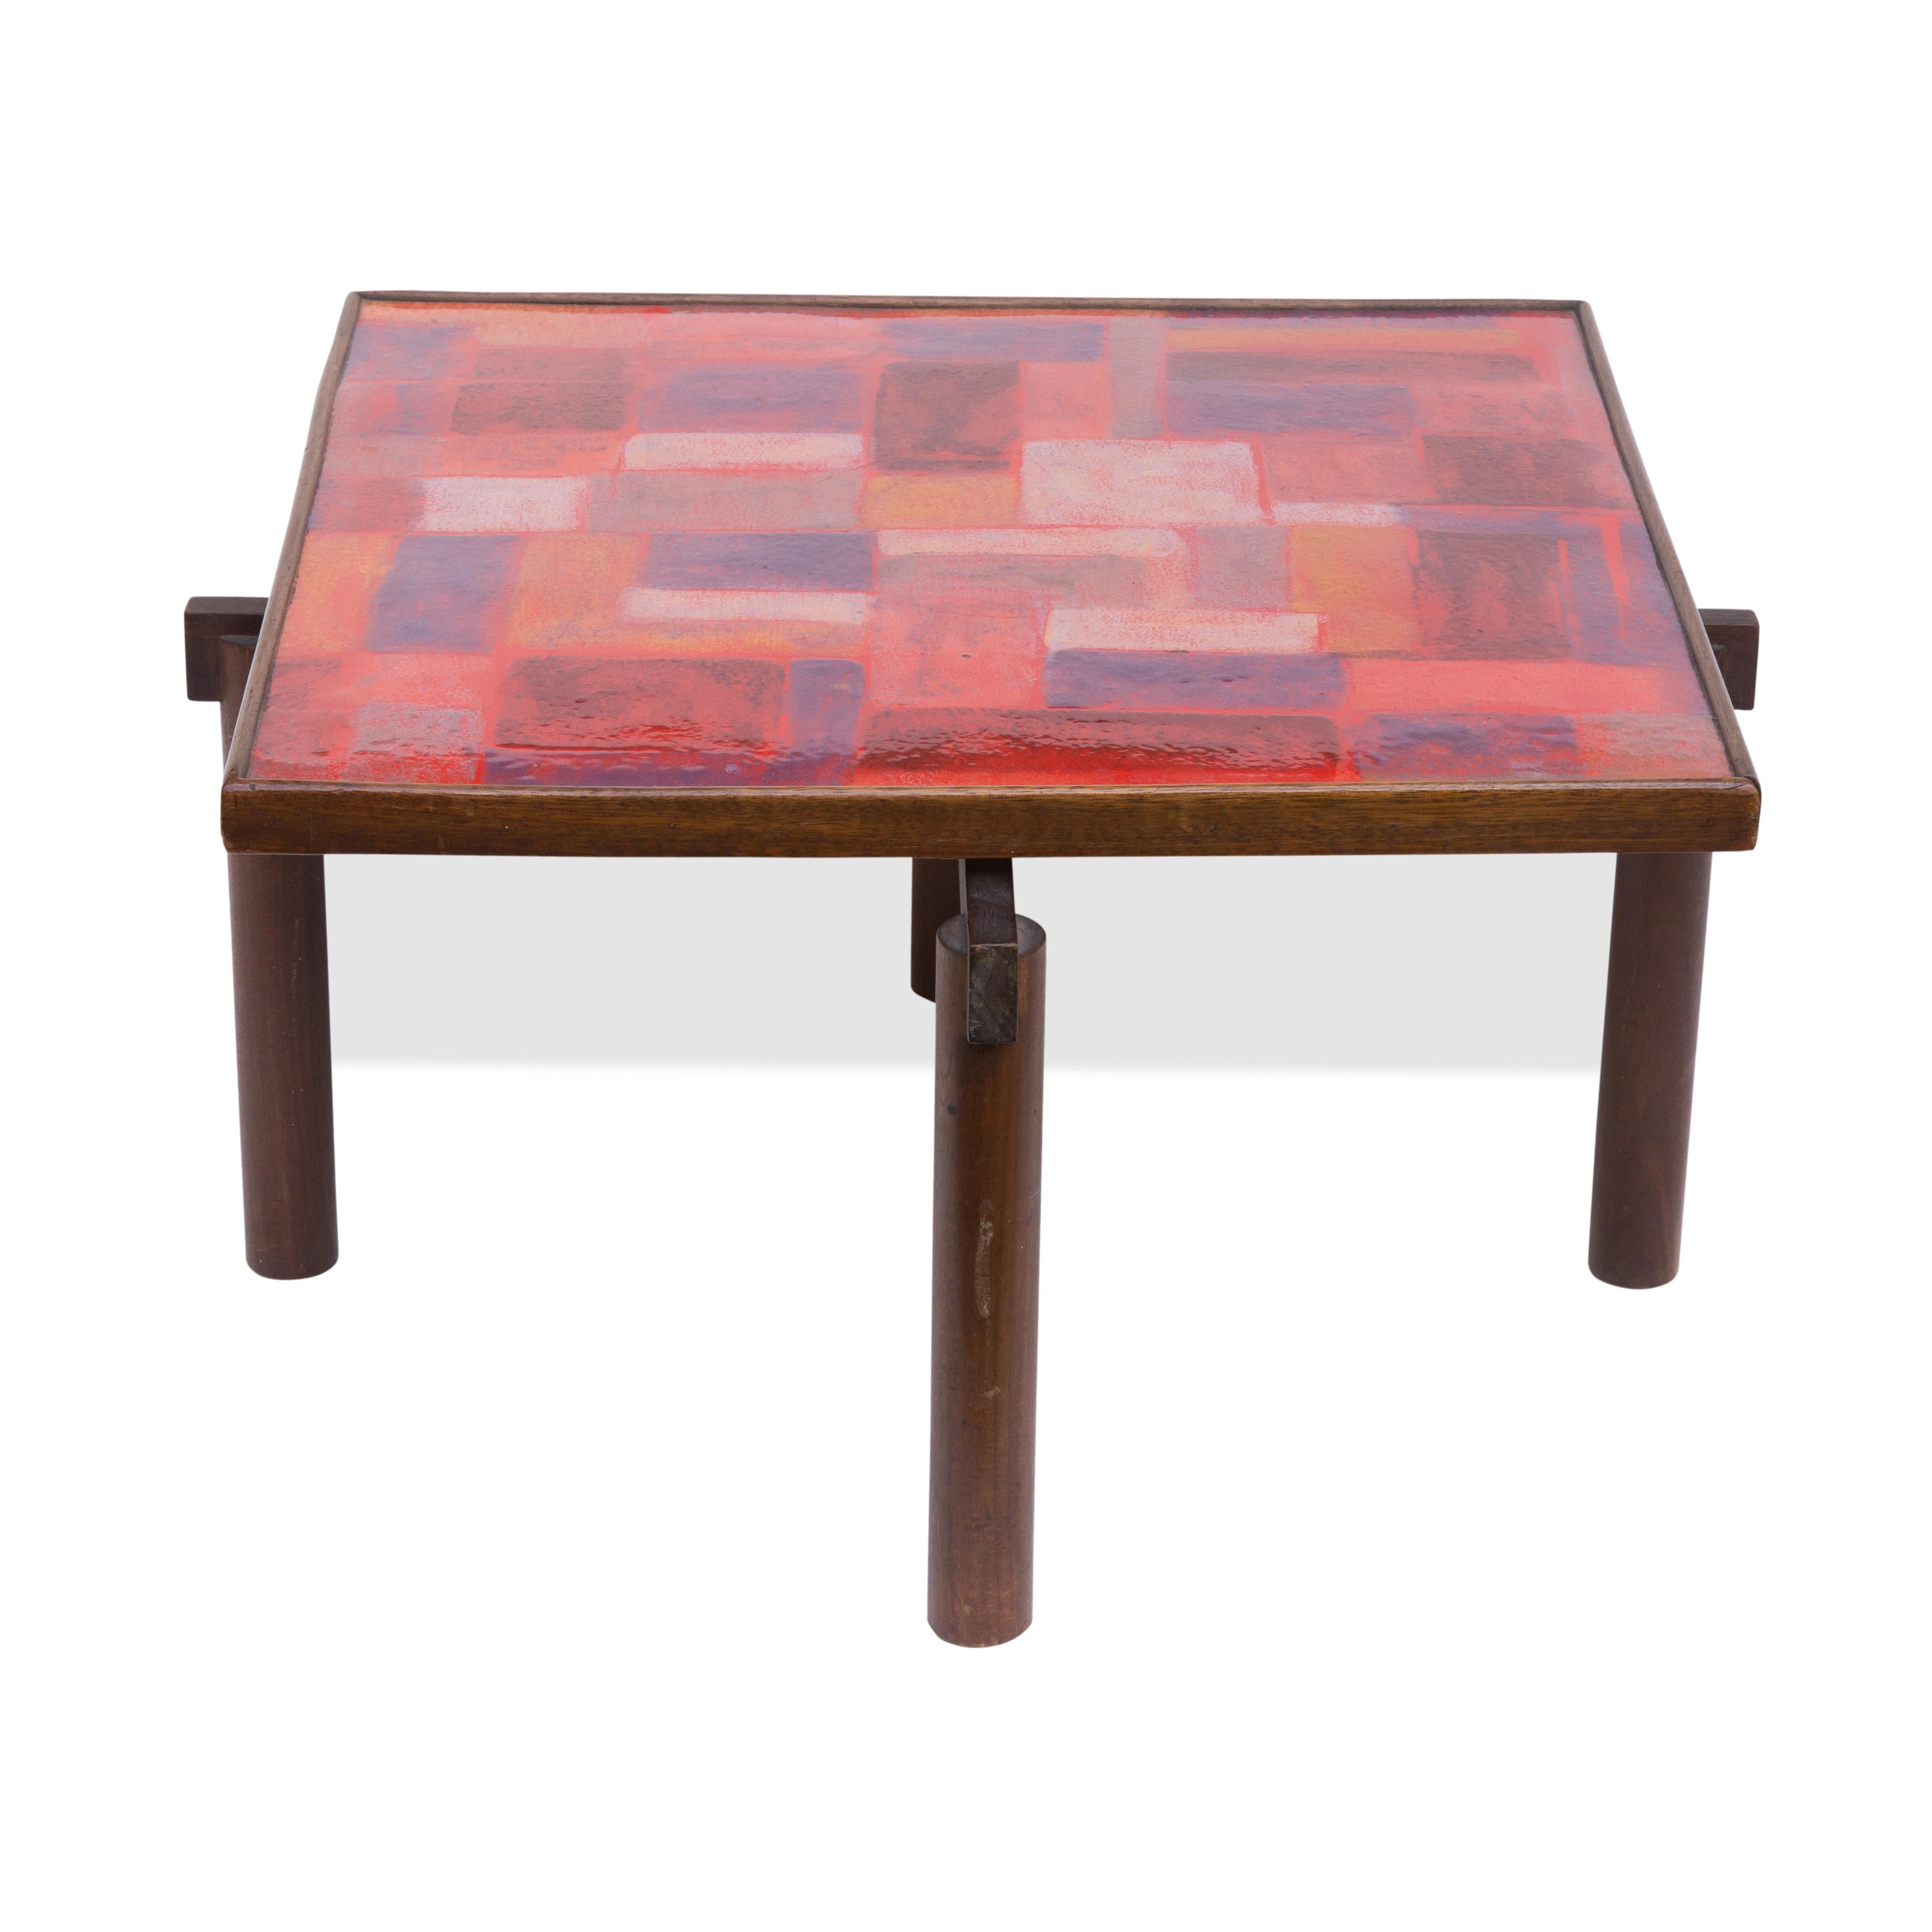 A really beautiful one off studio occasional table. 1960s Italian design Square shaped top with tones of abstract shapes in red, orange, purple, lilac colour enamelled metal top, wooden structure. 1960s Italian design by Siva Poggibonsi.